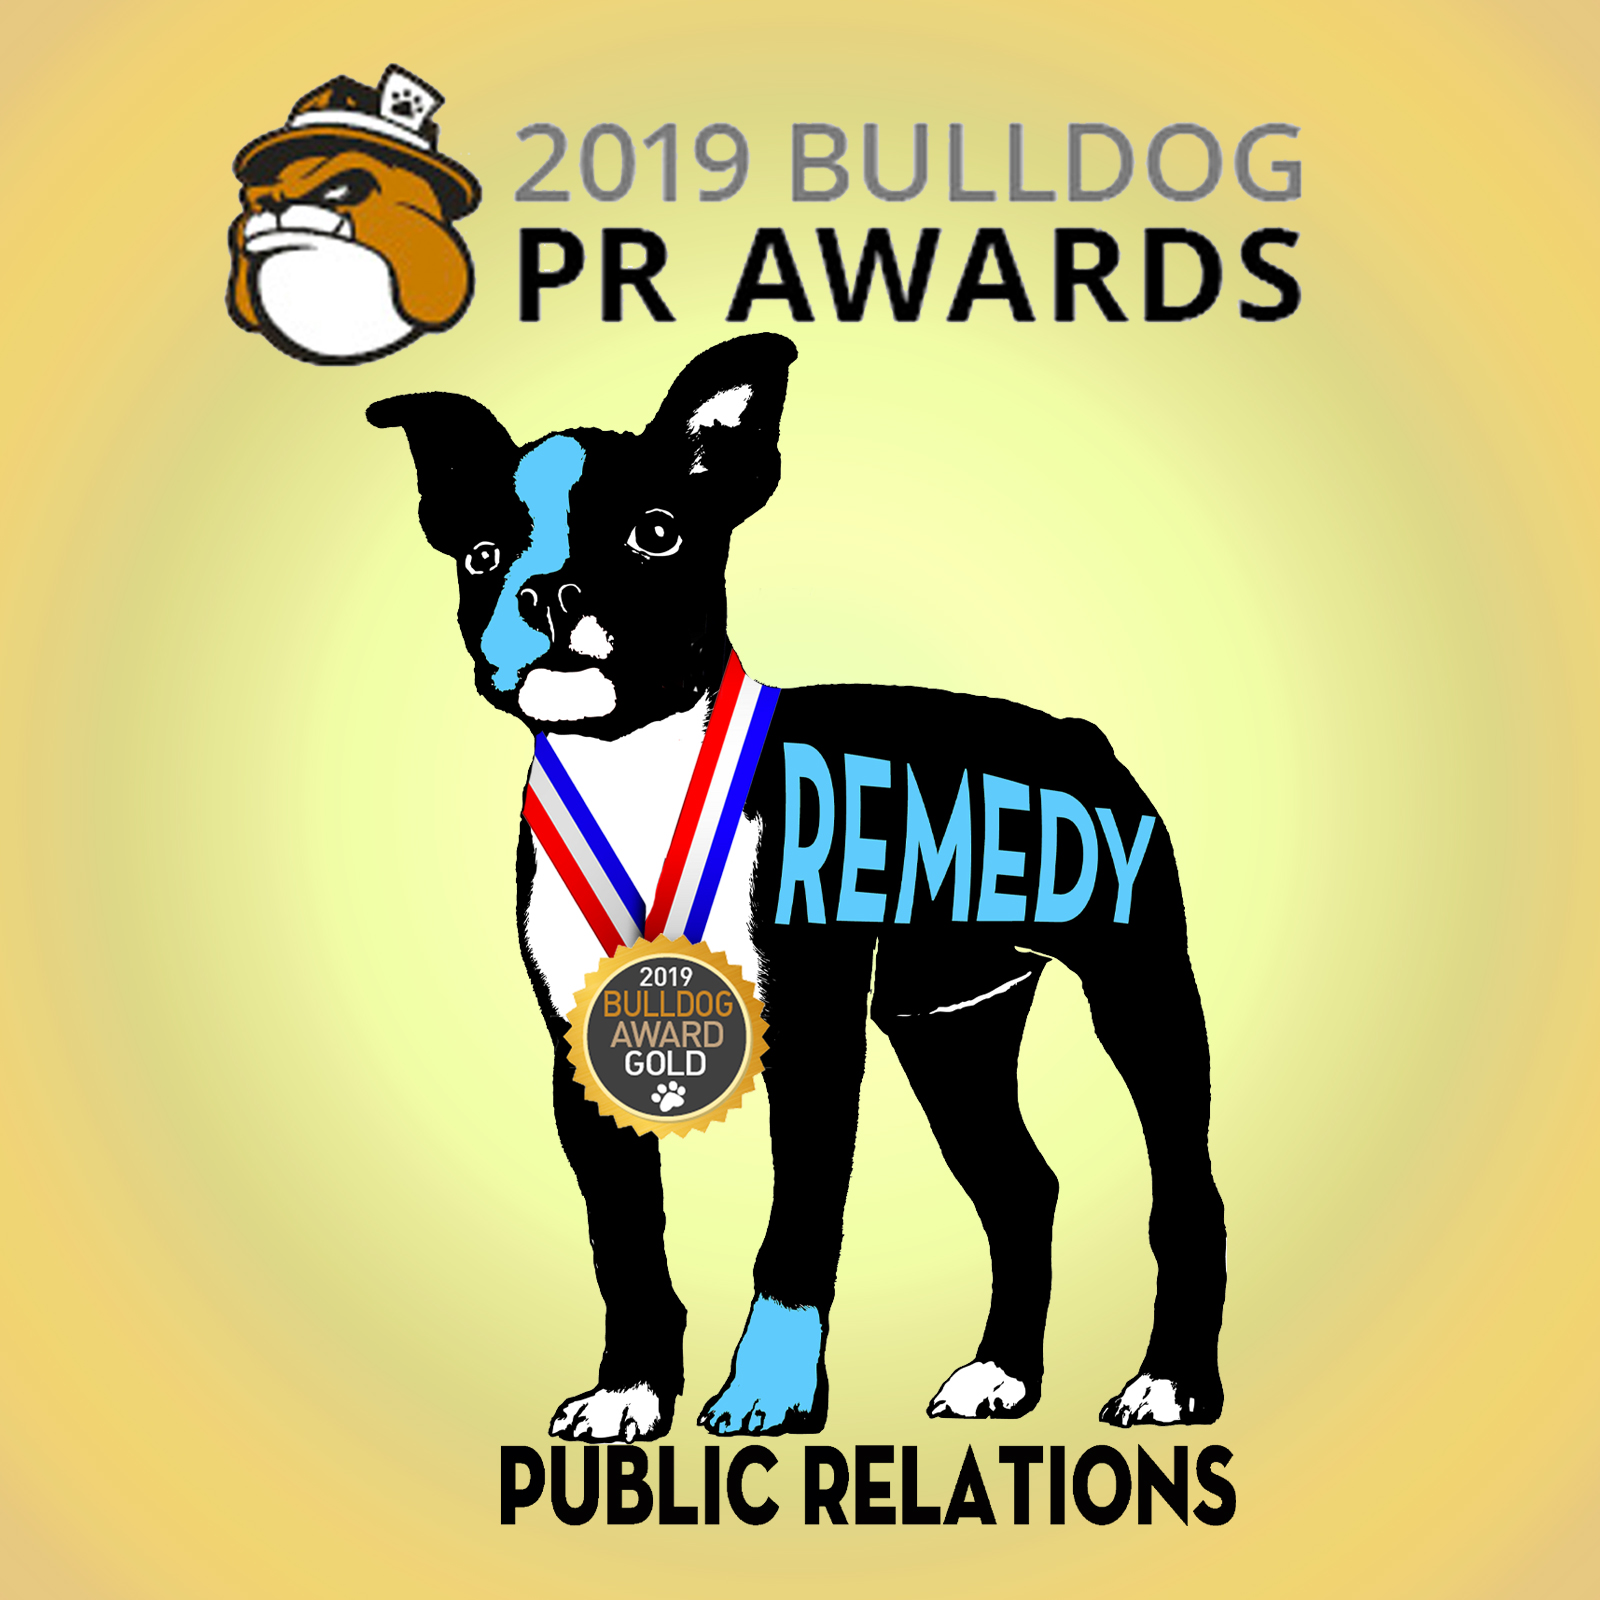 San Diego's Leading Outdoor-Lifestyle and Consumer PR Firm Wins Big At Bulldog Awards